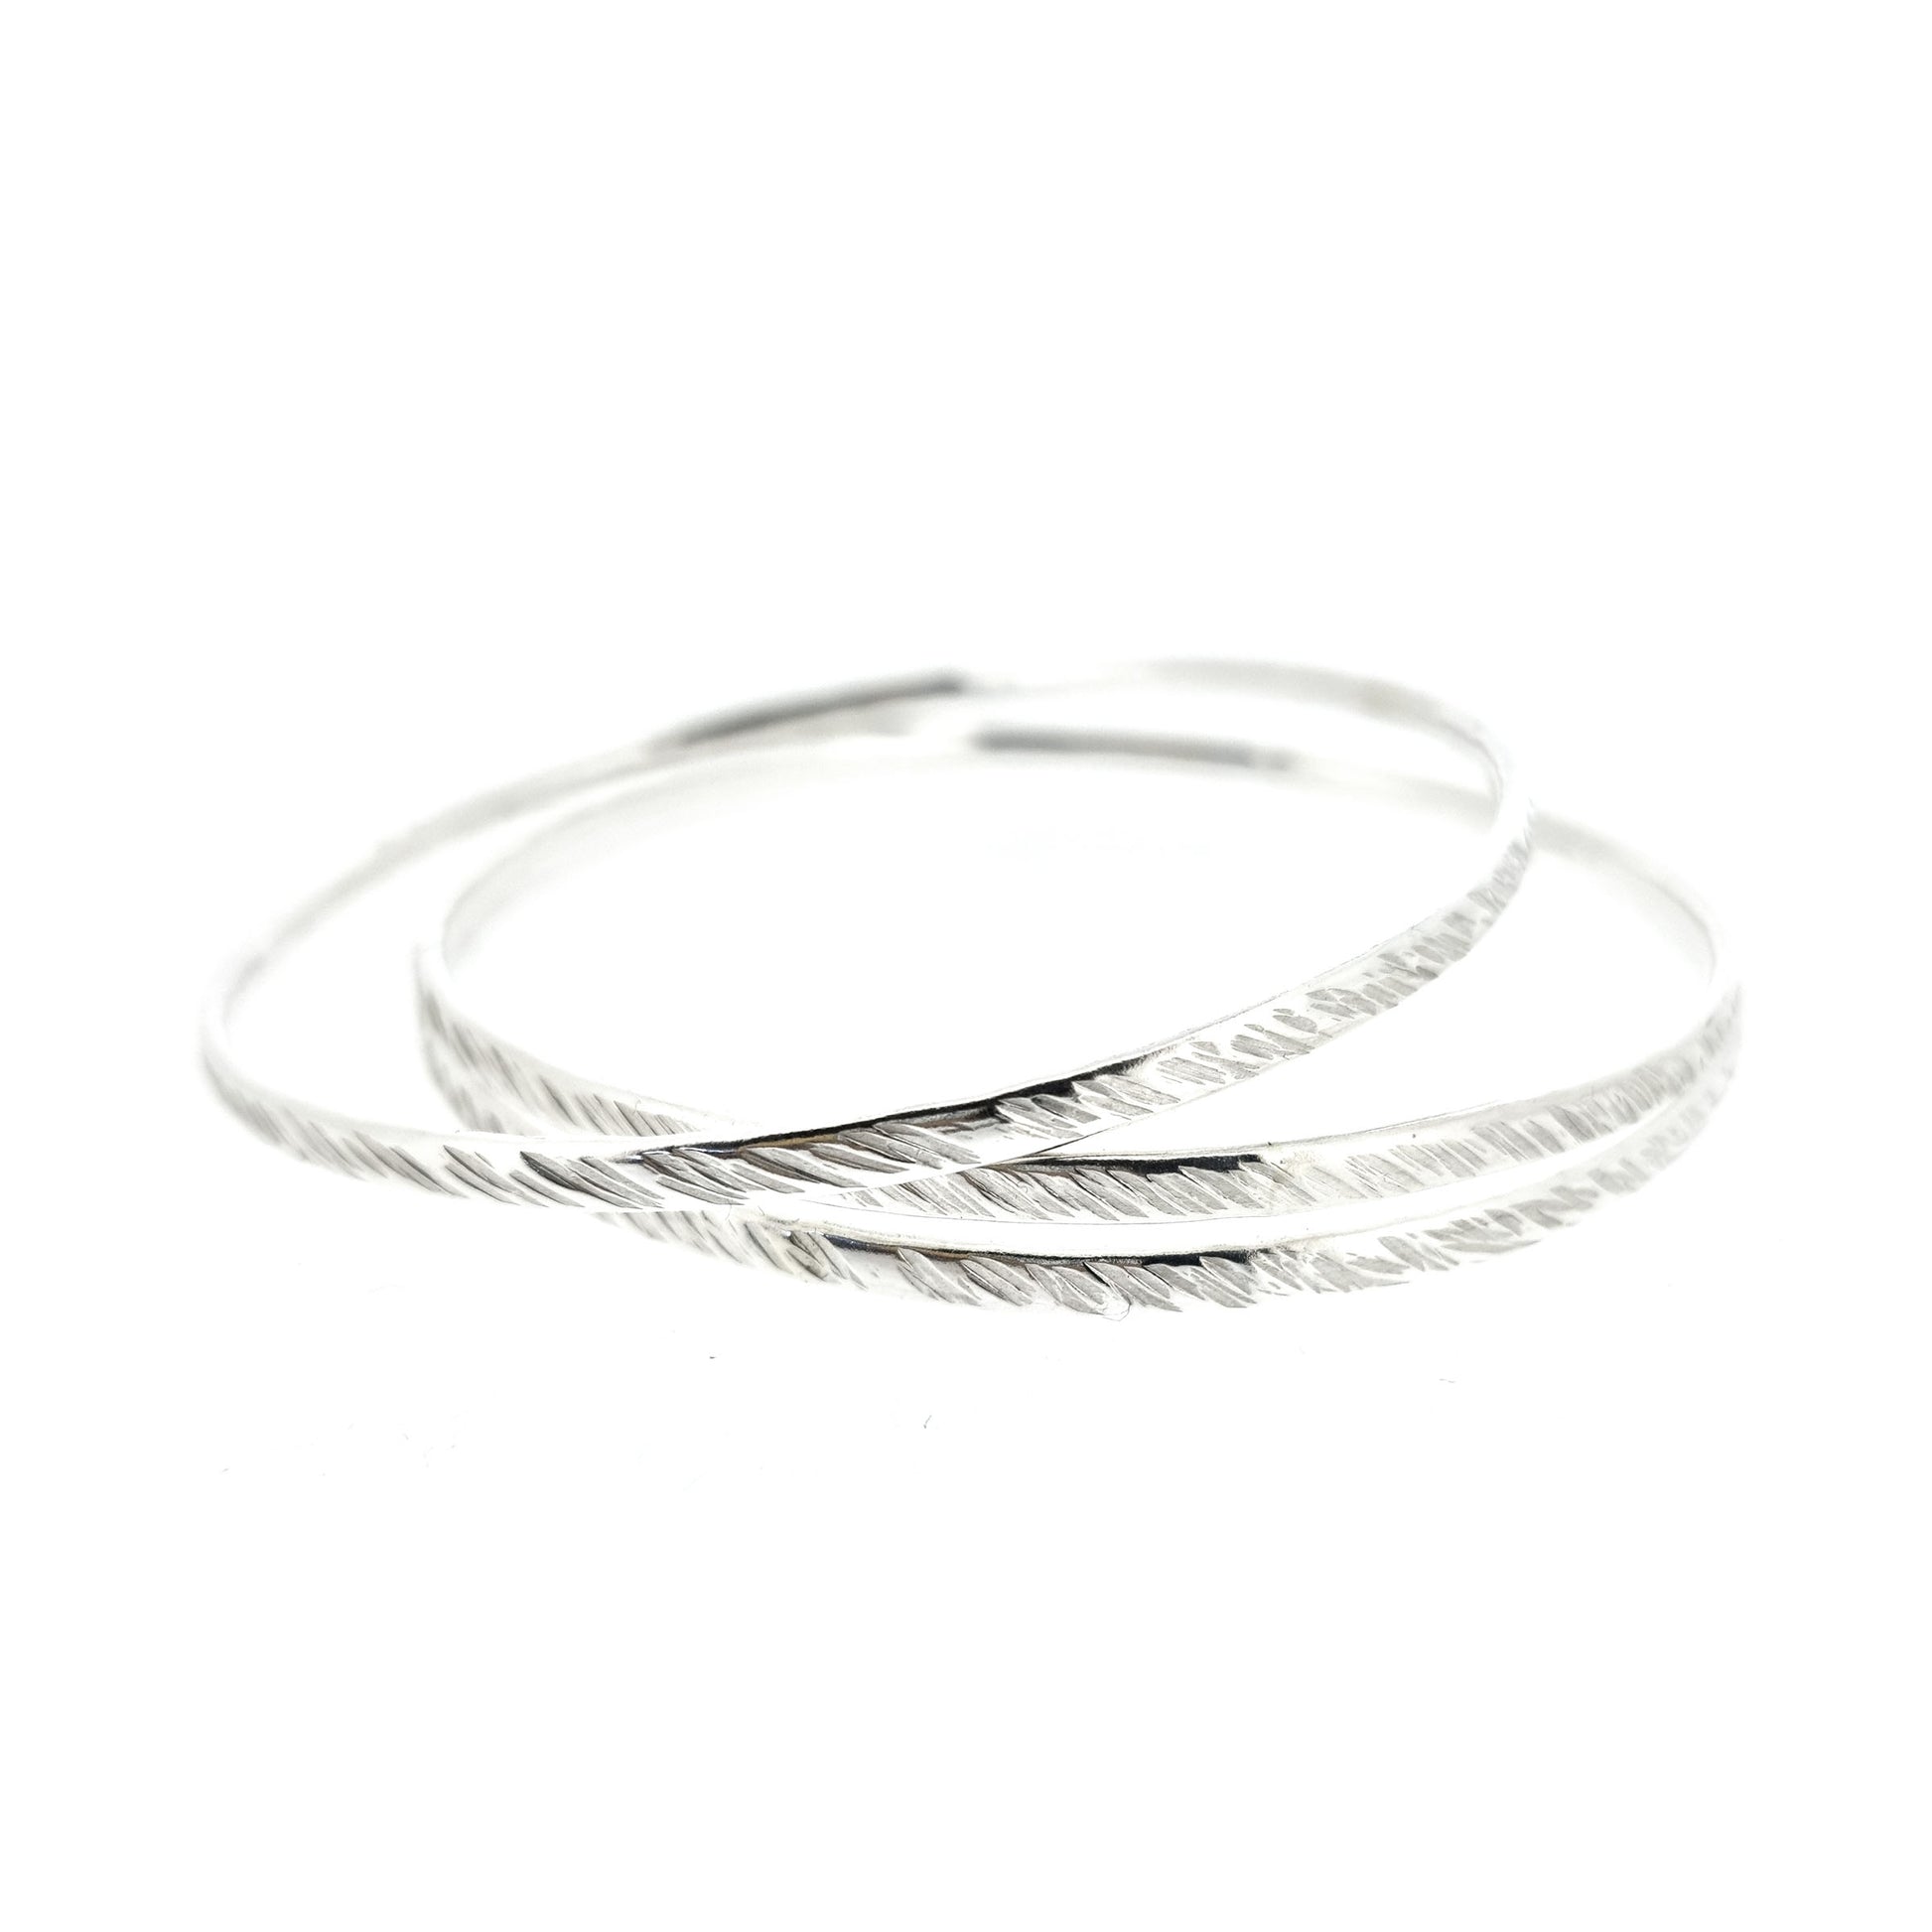 A set of 3 silver round bangles with a diagonal rustic lined texture.